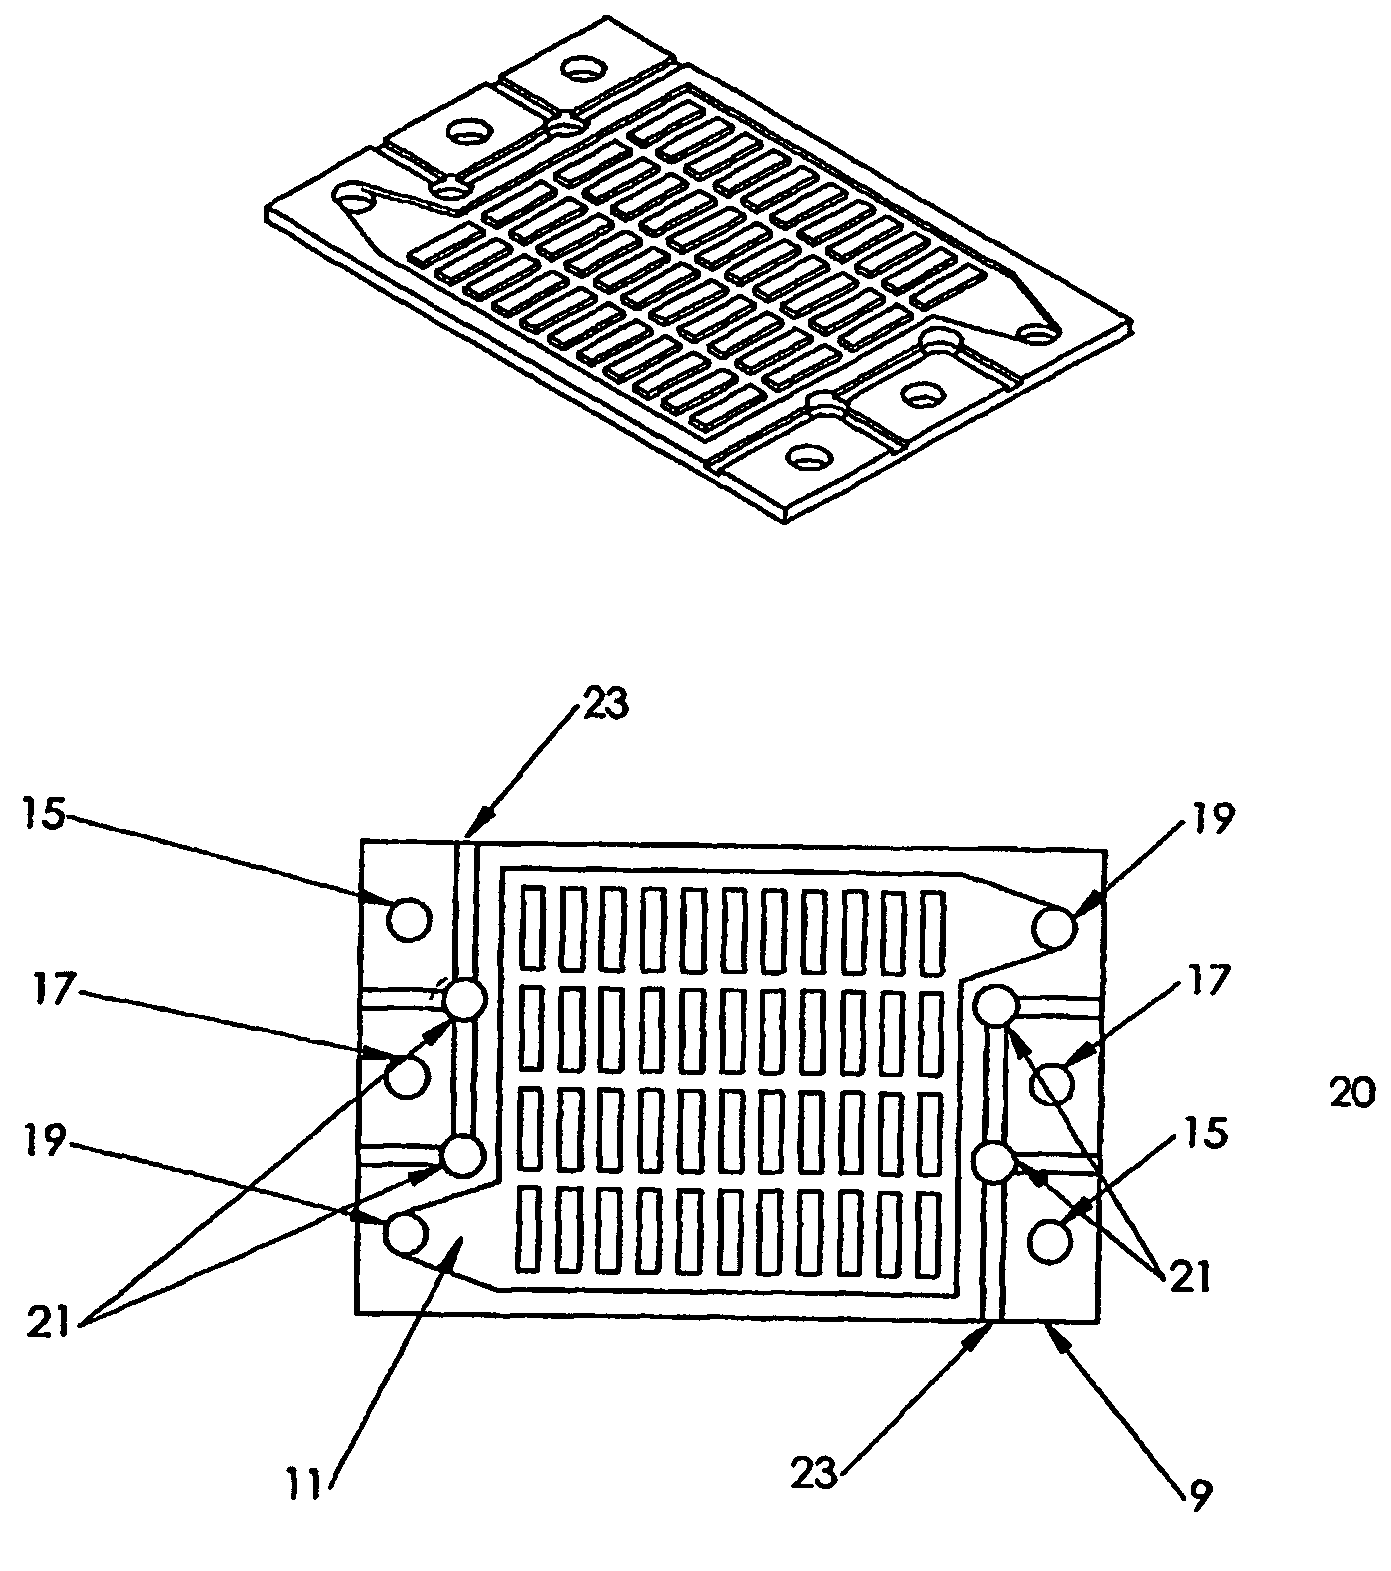 Membrane based electrochemical cell stacks